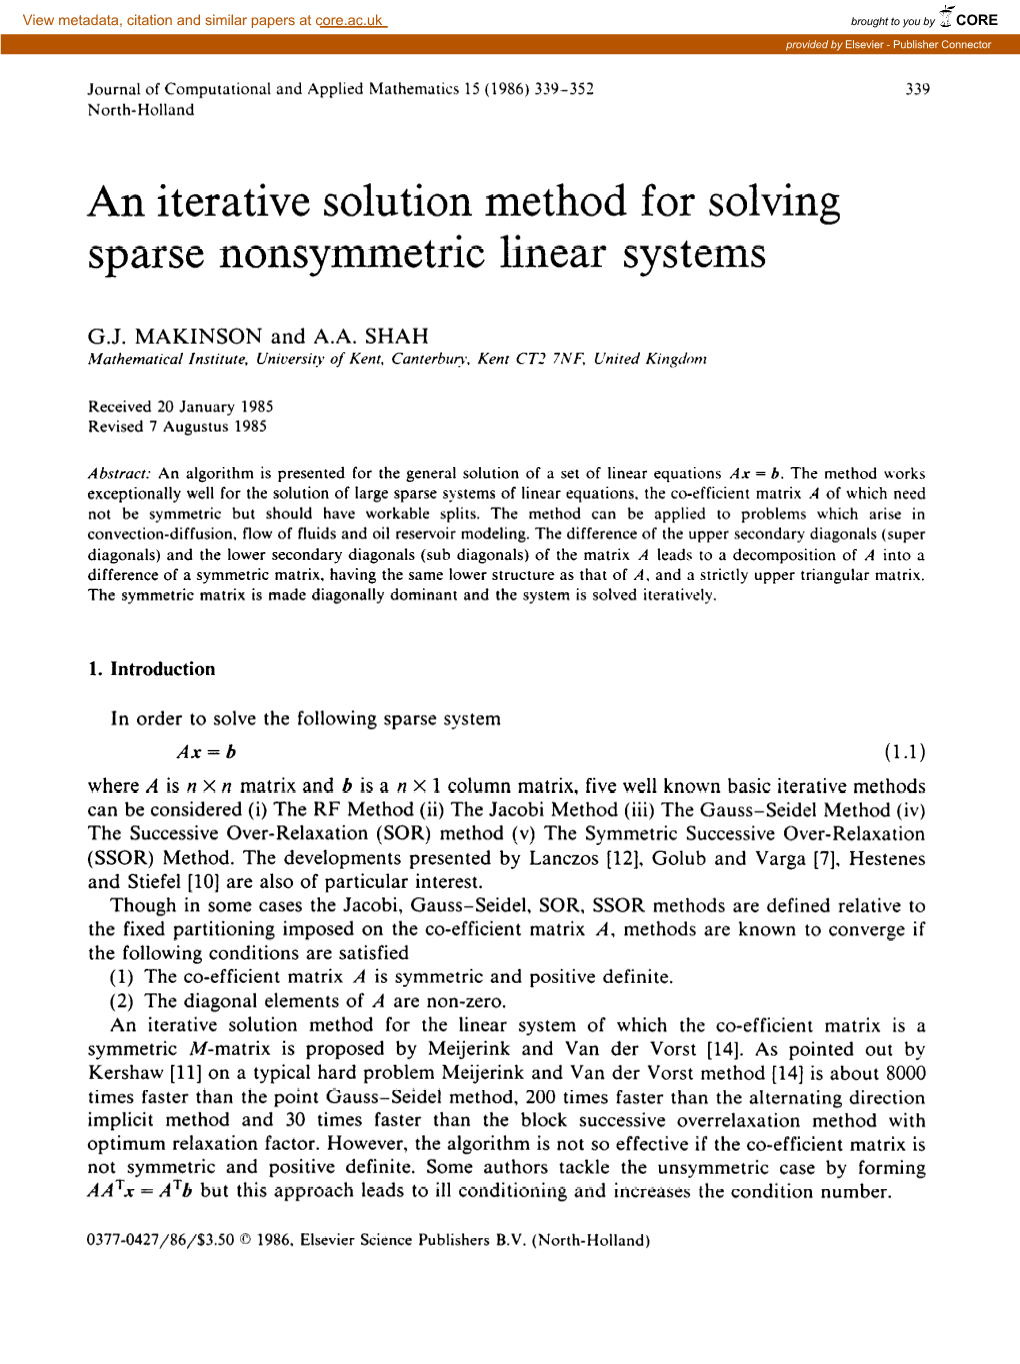 An Iterative Solution Method for Solving Sparse Nonsymmetric Linear Systems